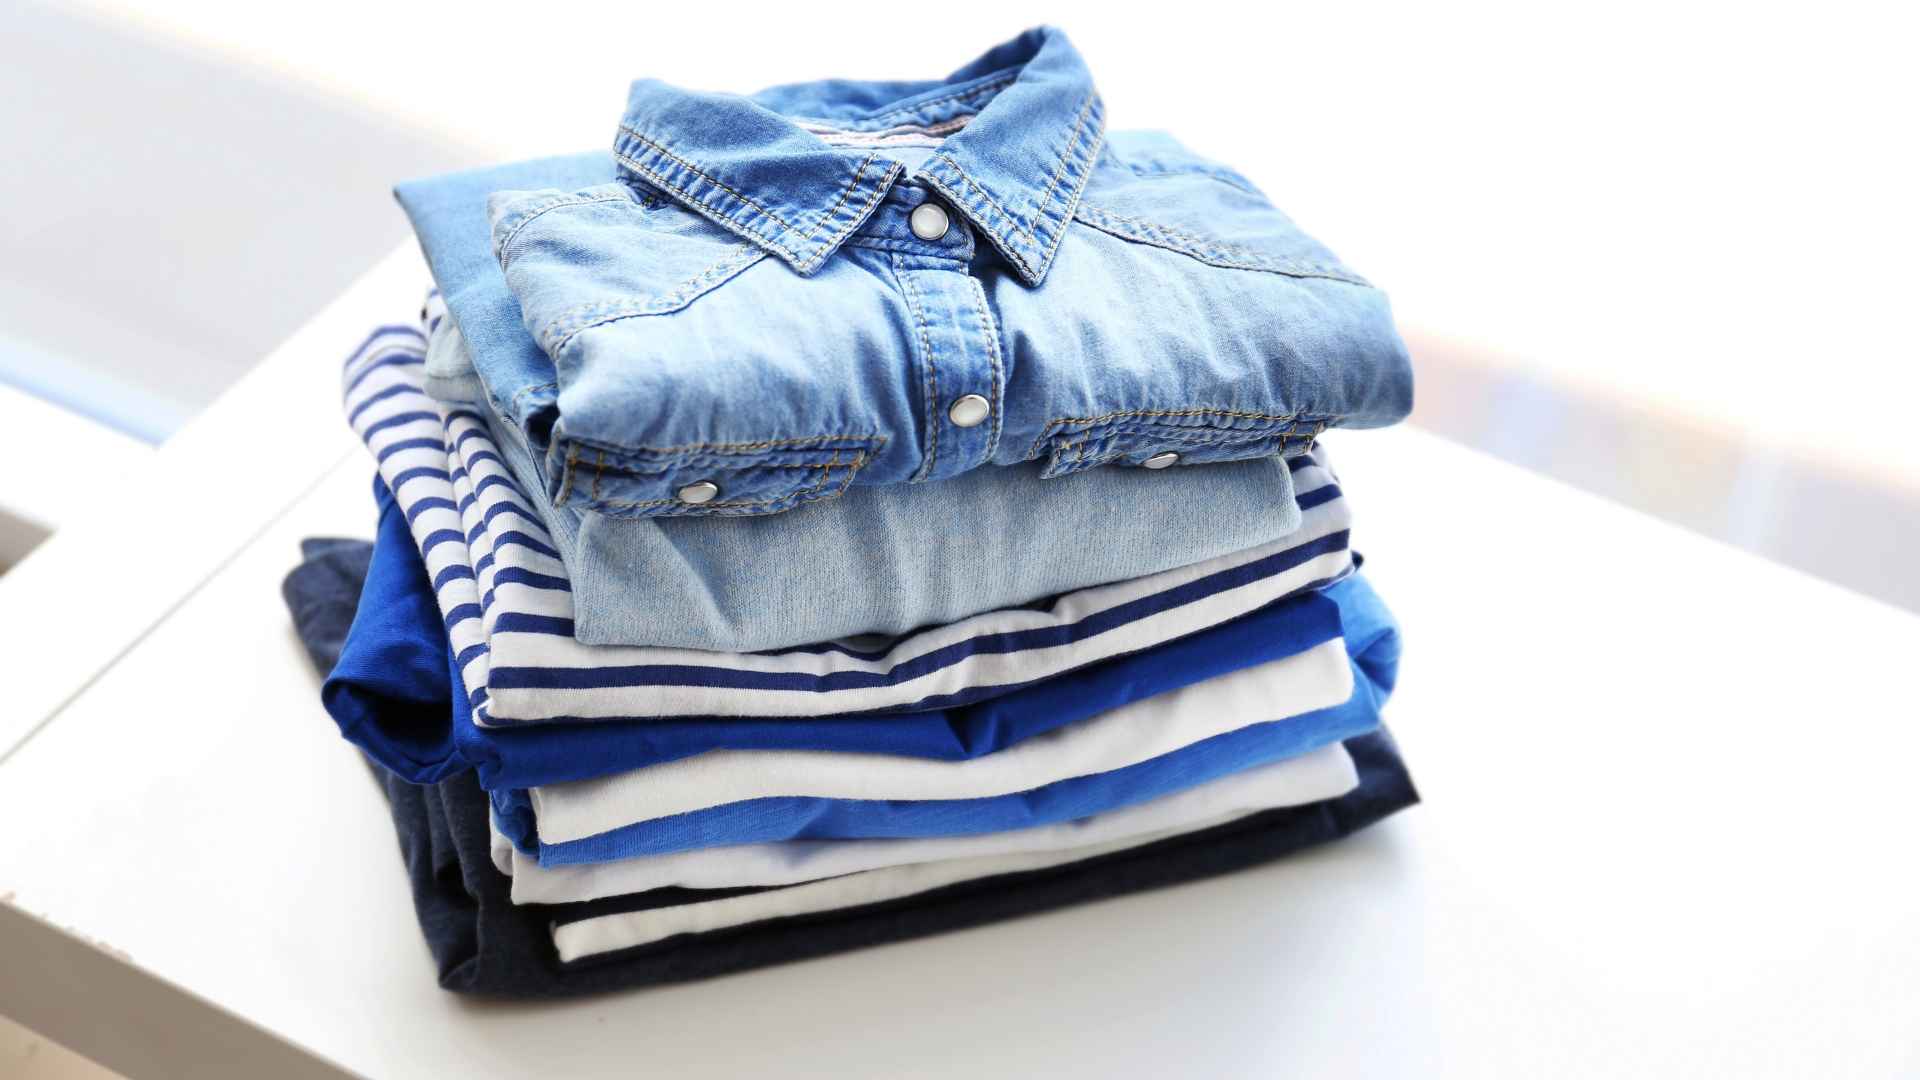 Clever methods for storing clothes